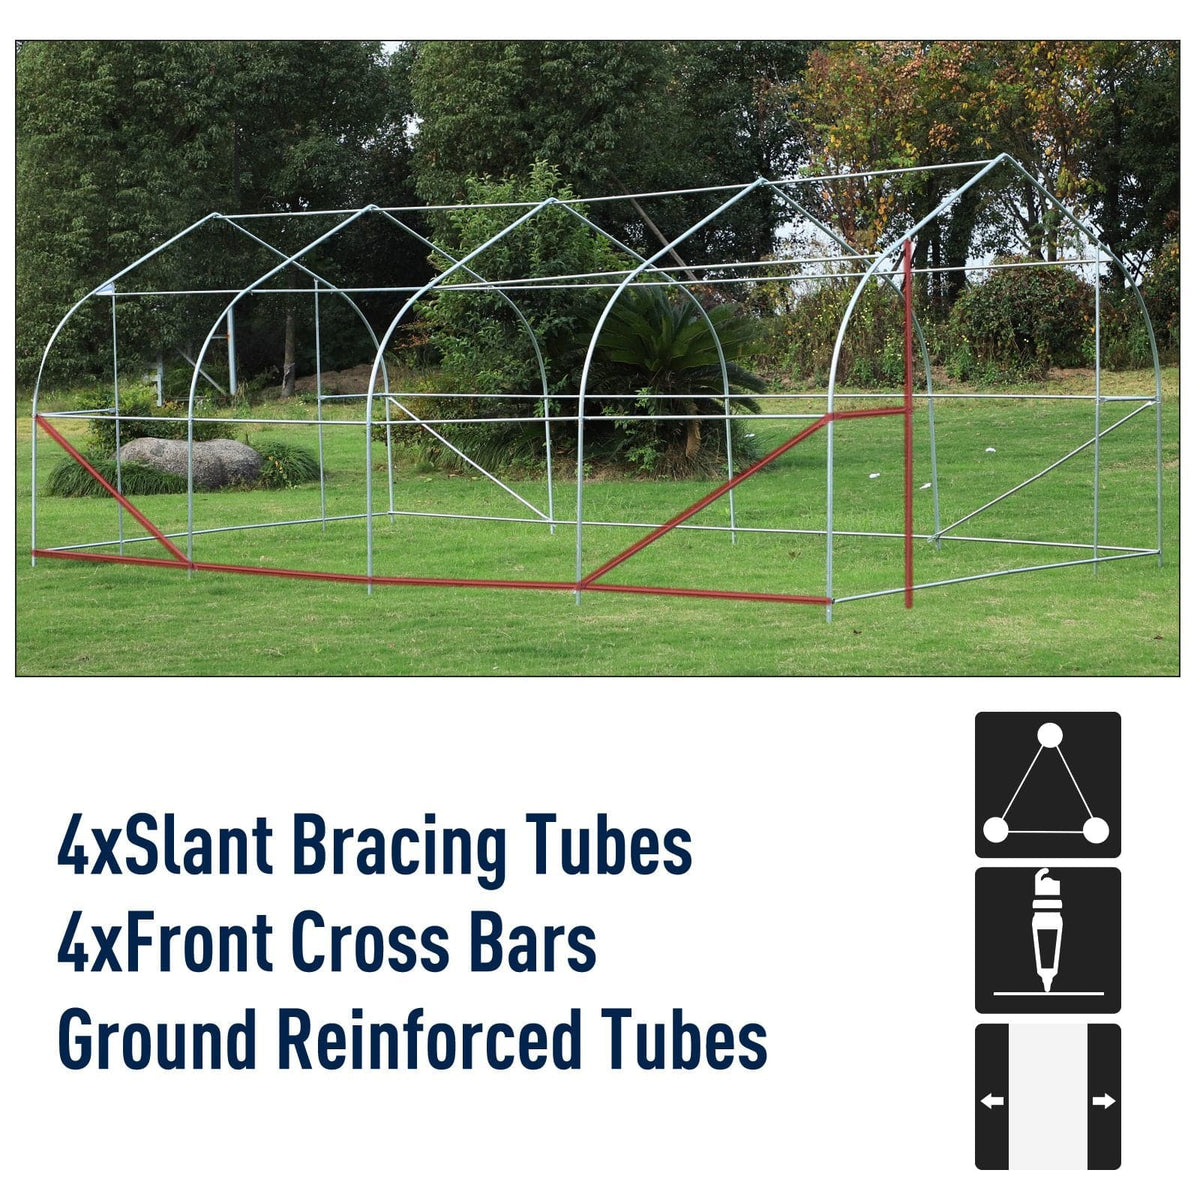 This Aosom greenhouse structure, the Outsunny 20&#39; x 10&#39; x 7&#39; Deluxe High Tunnel Walk-in Garden Greenhouse Kit - White, features 4 slat bracing tubes and 4 cross bars, along with the additional support of 4 ground re-enforced tubes. Perfect for cultivating plants and crops.